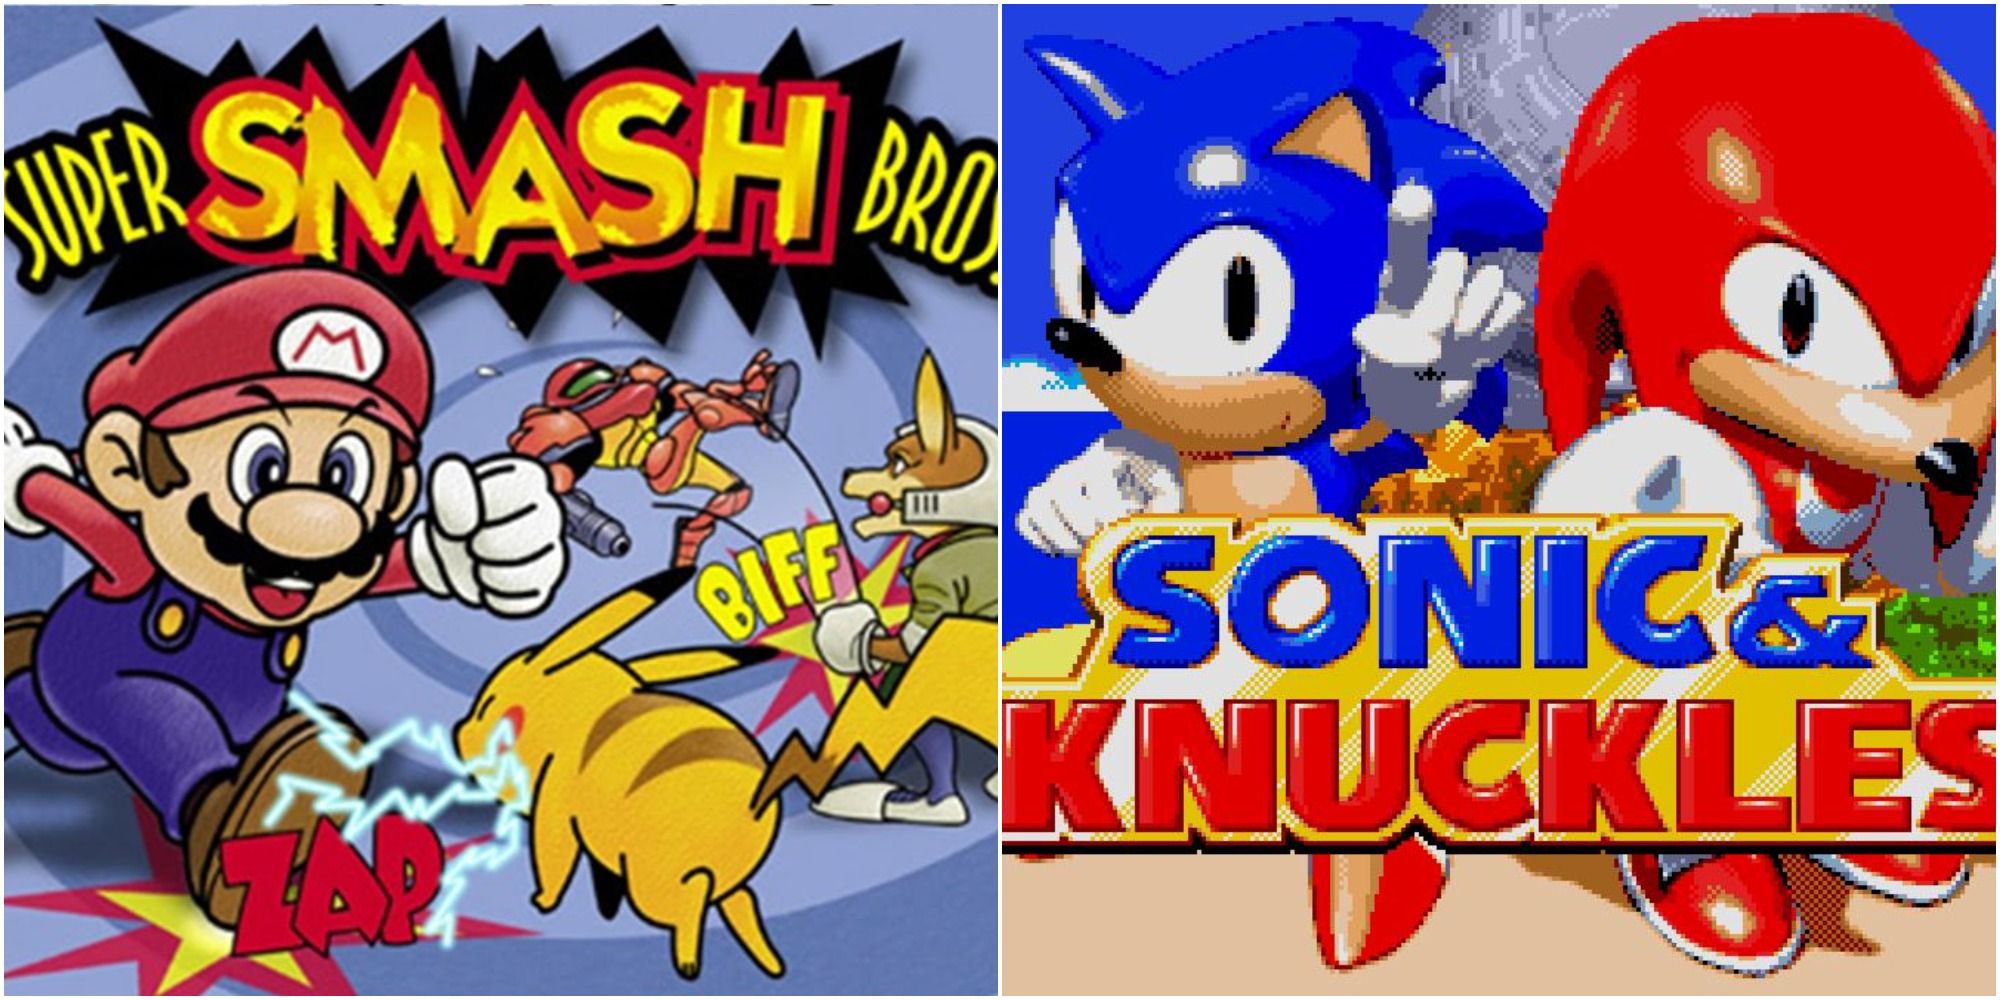 super smash bros and sonic & knuckles